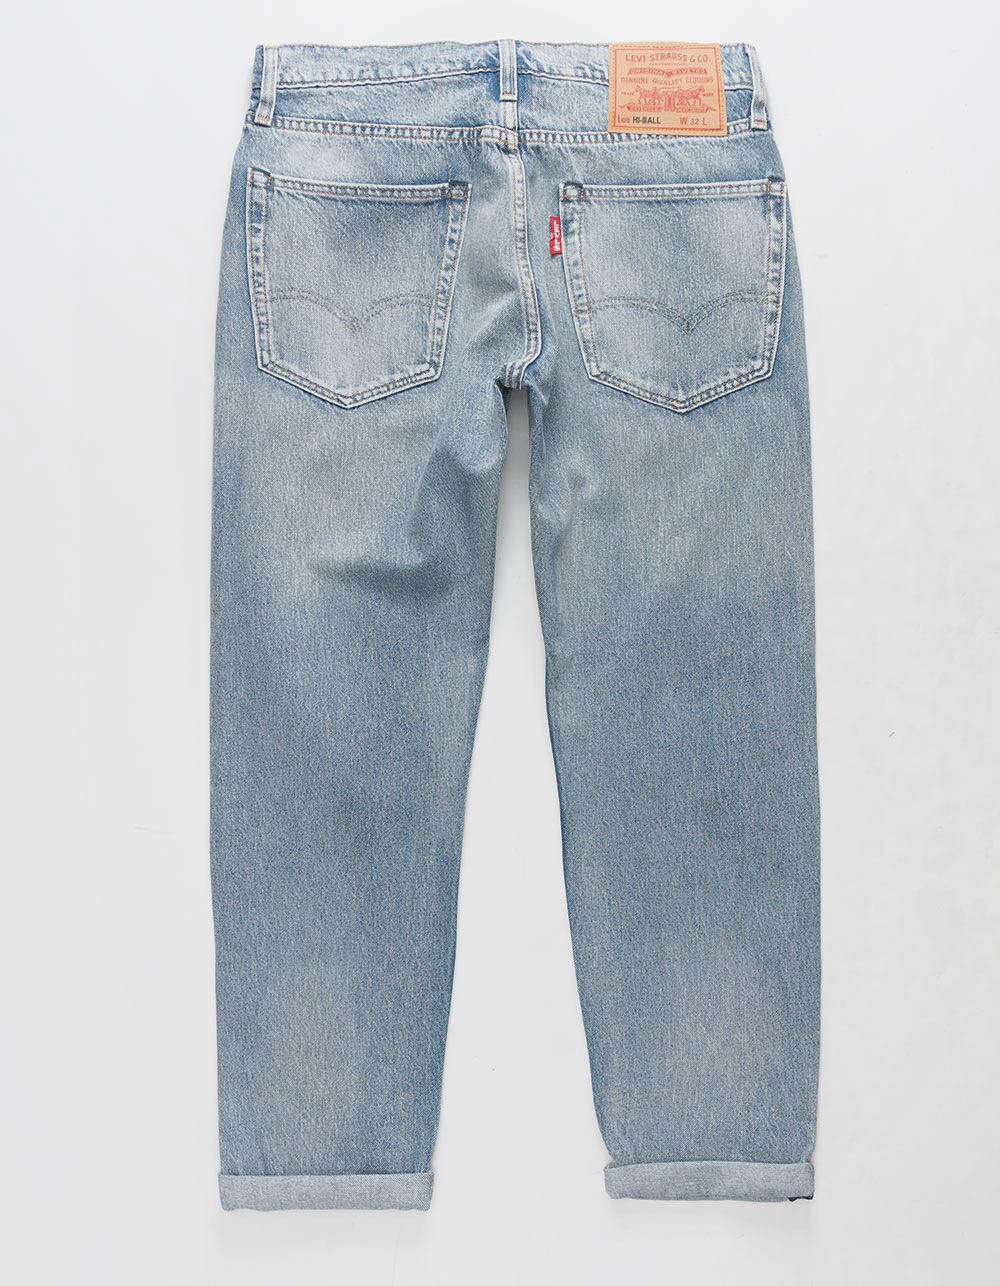 LEVI'S Hi-ball Roll Swing Man Mens Jeans image number 4